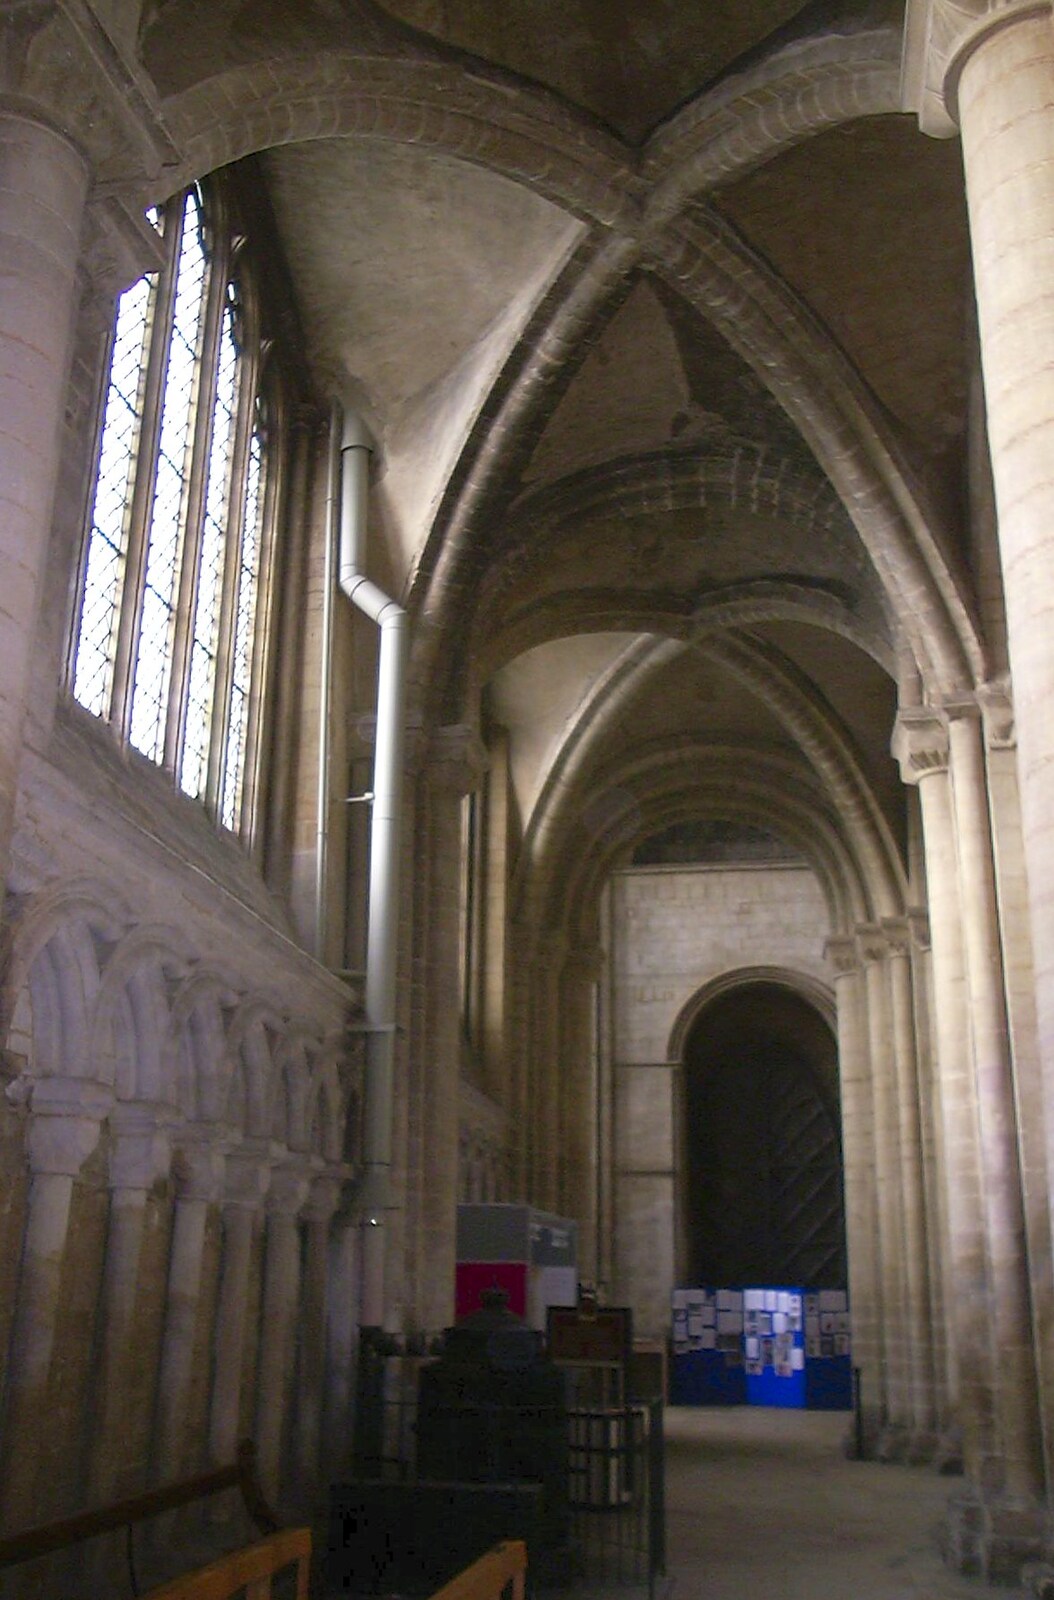 An area of the transept from Longview, Easyworld and Peterborough Cathedral, Cambridgeshire - 10th February 2003